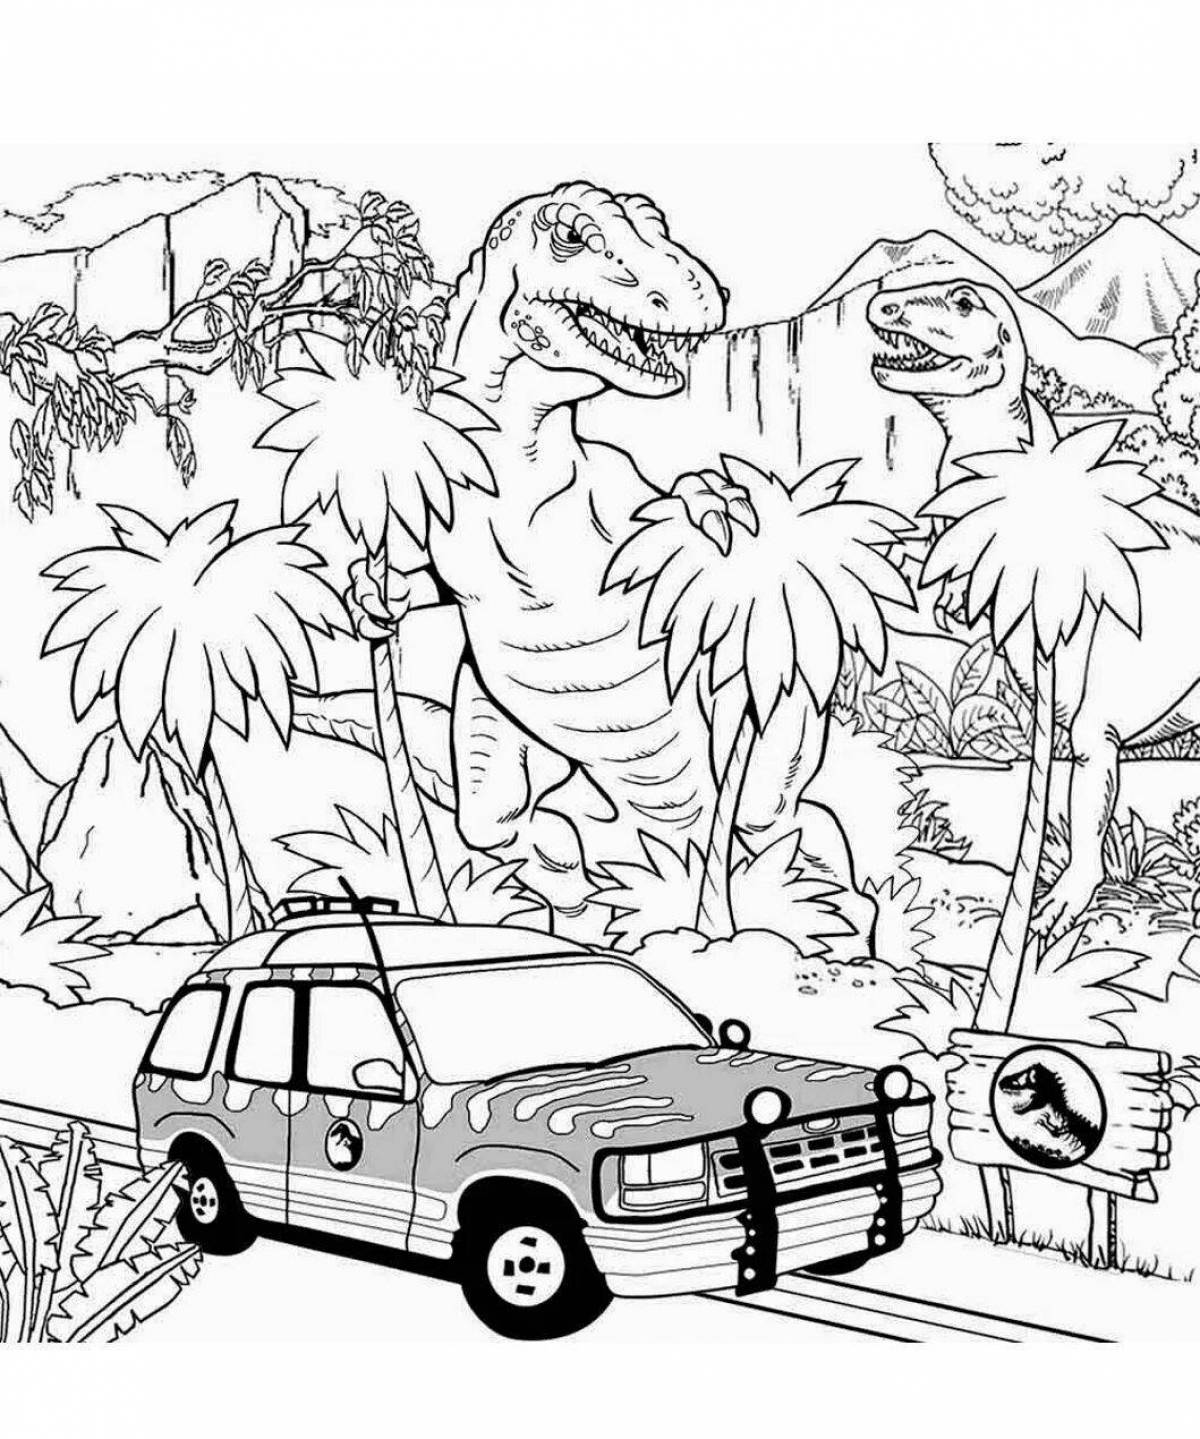 Colorful jurassic park coloring book